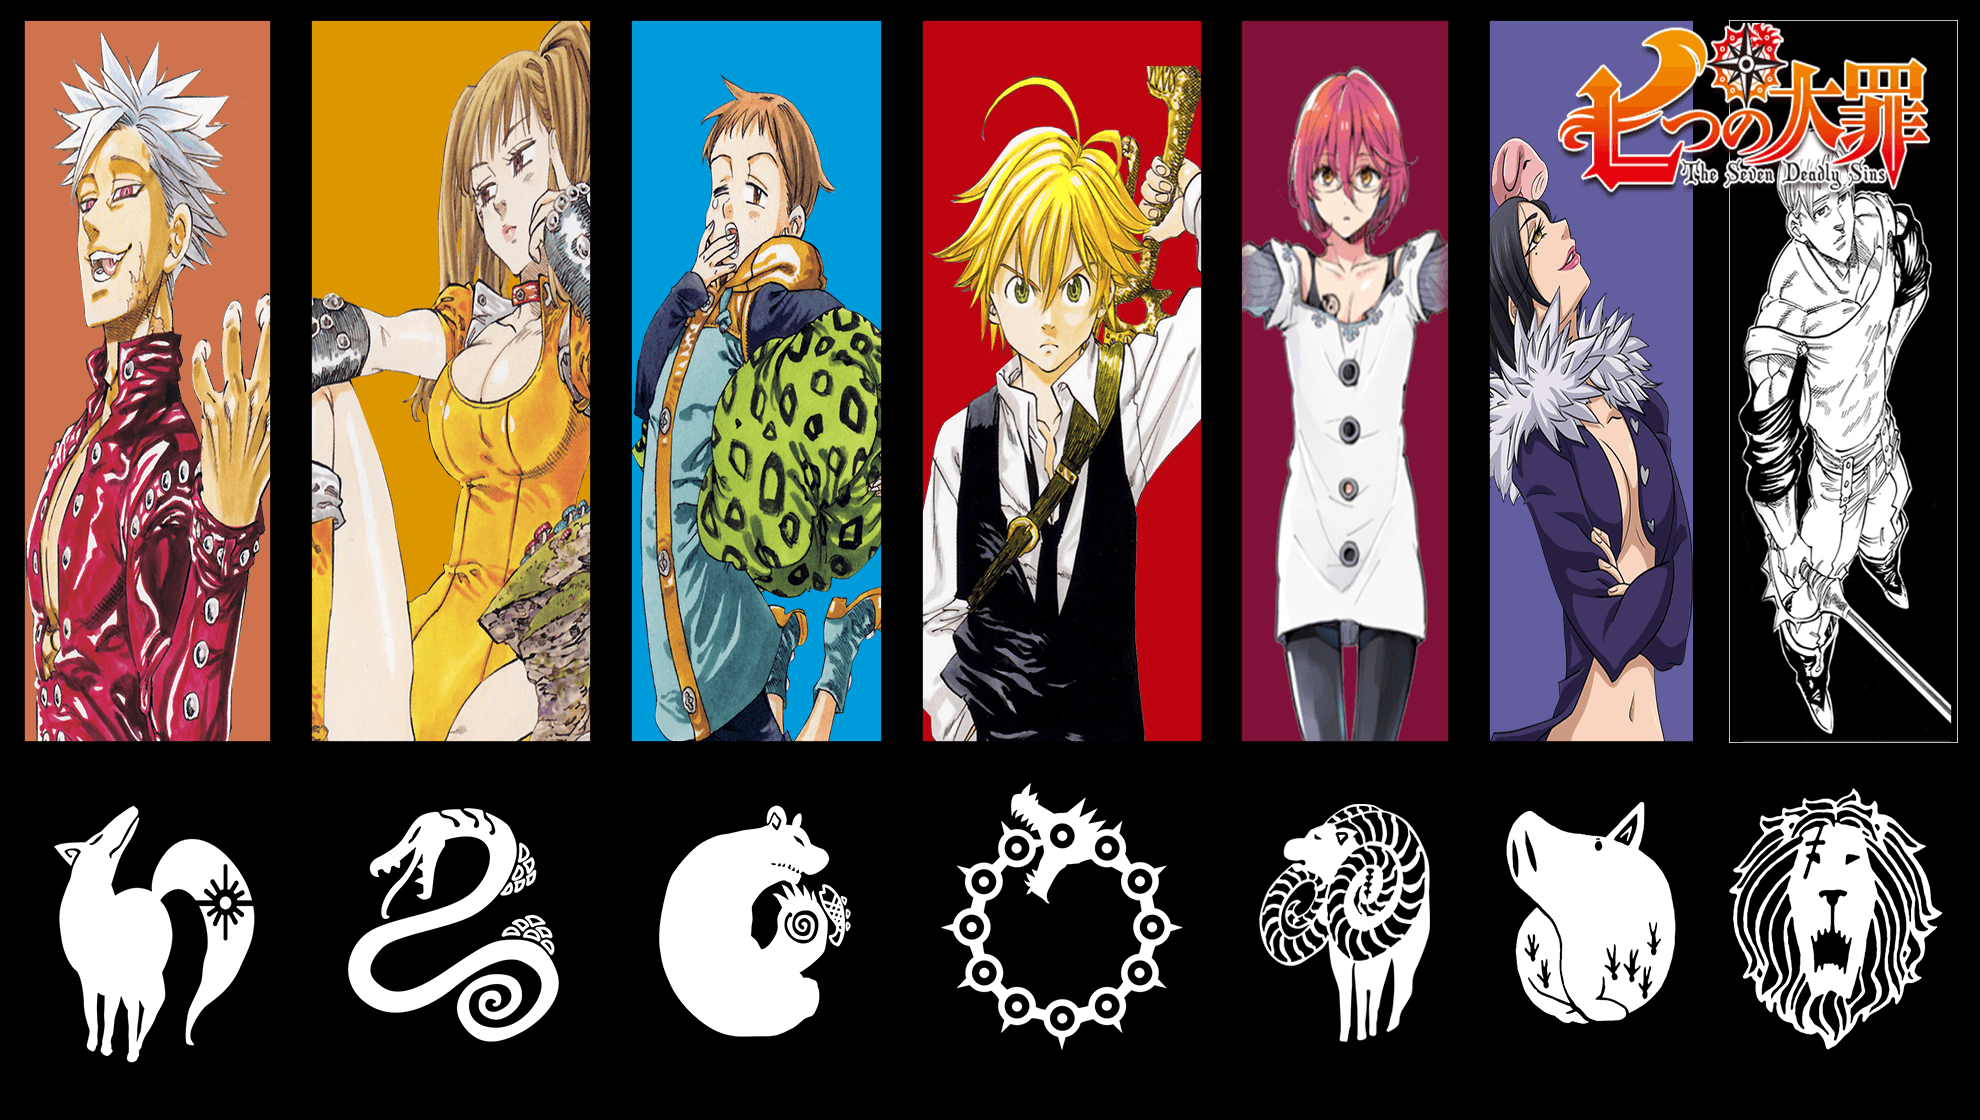 7 Deadly Sins Wallpaper 66 images